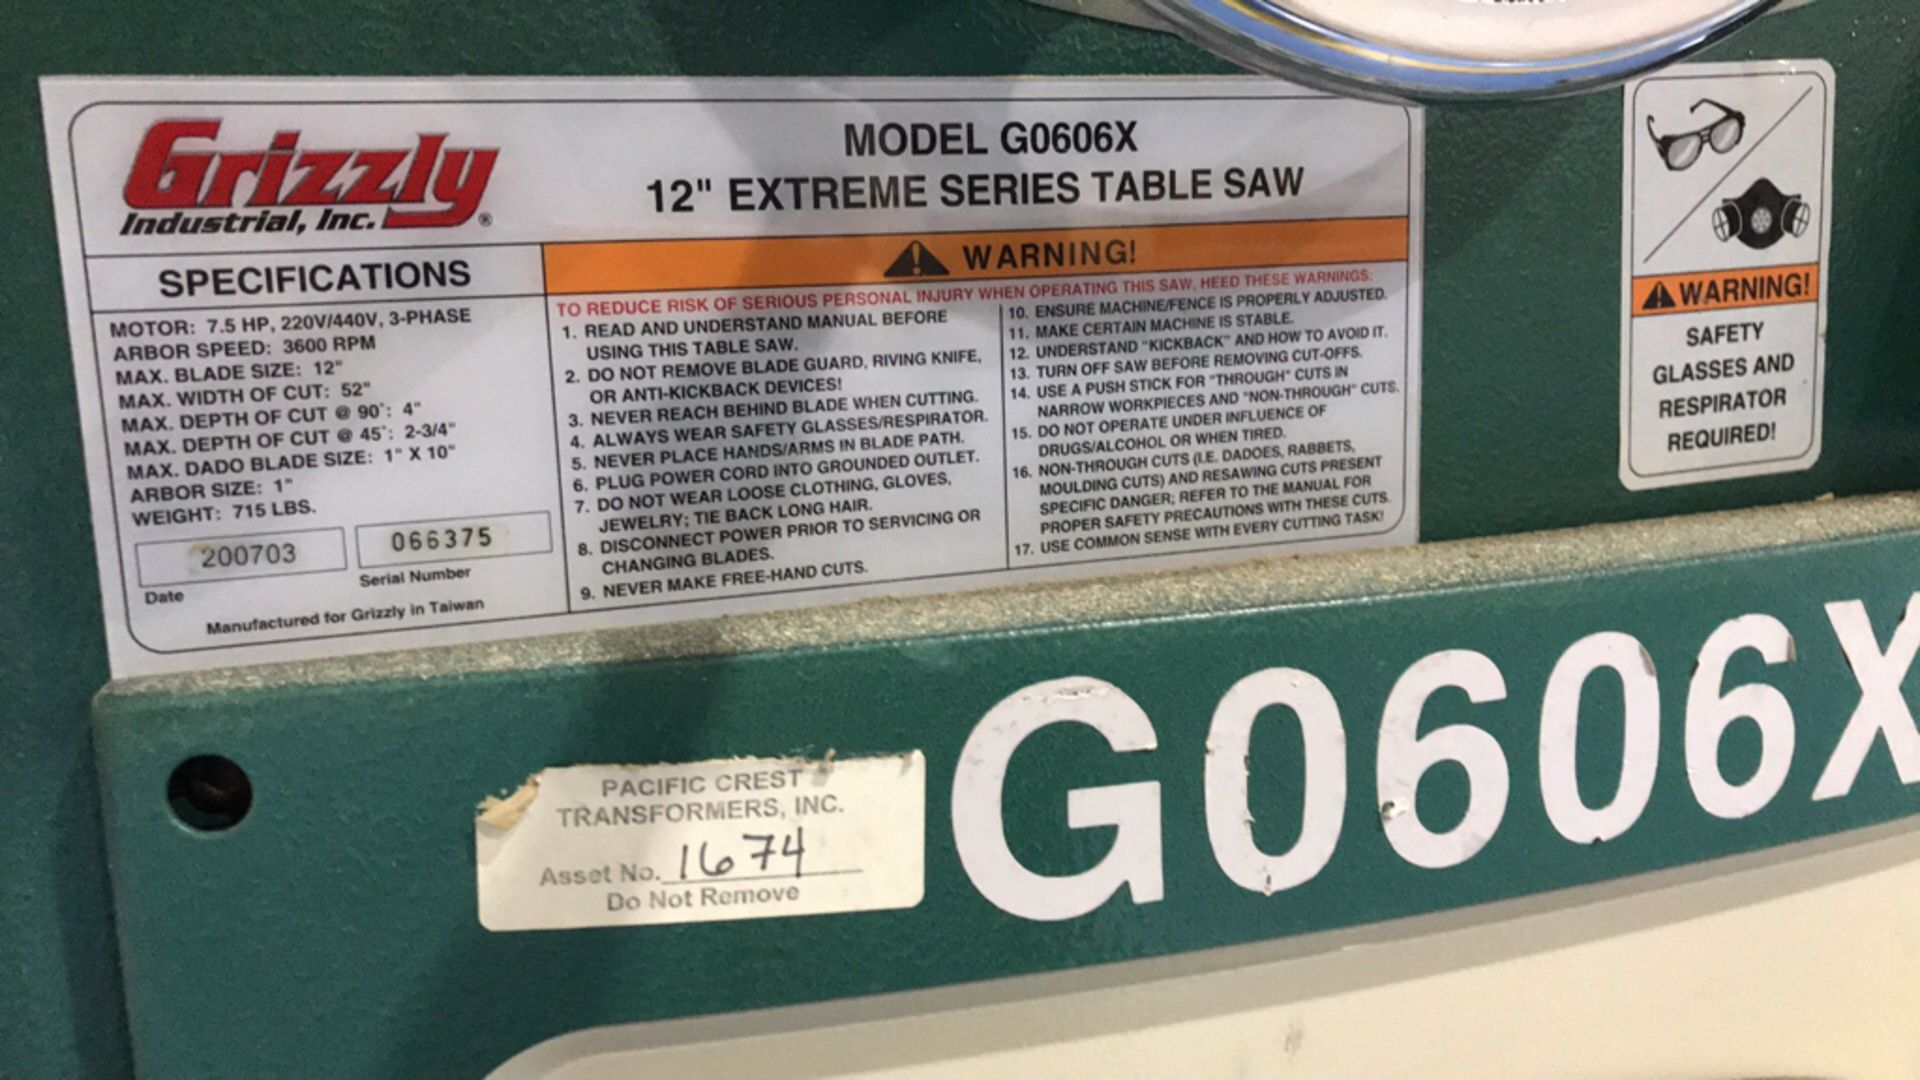 Grizzly 12" Extreme Series Table Saw, Model G0606X, 7.5 HP, 220/240V, 3 Phase w/rigid vac dust - Image 3 of 7